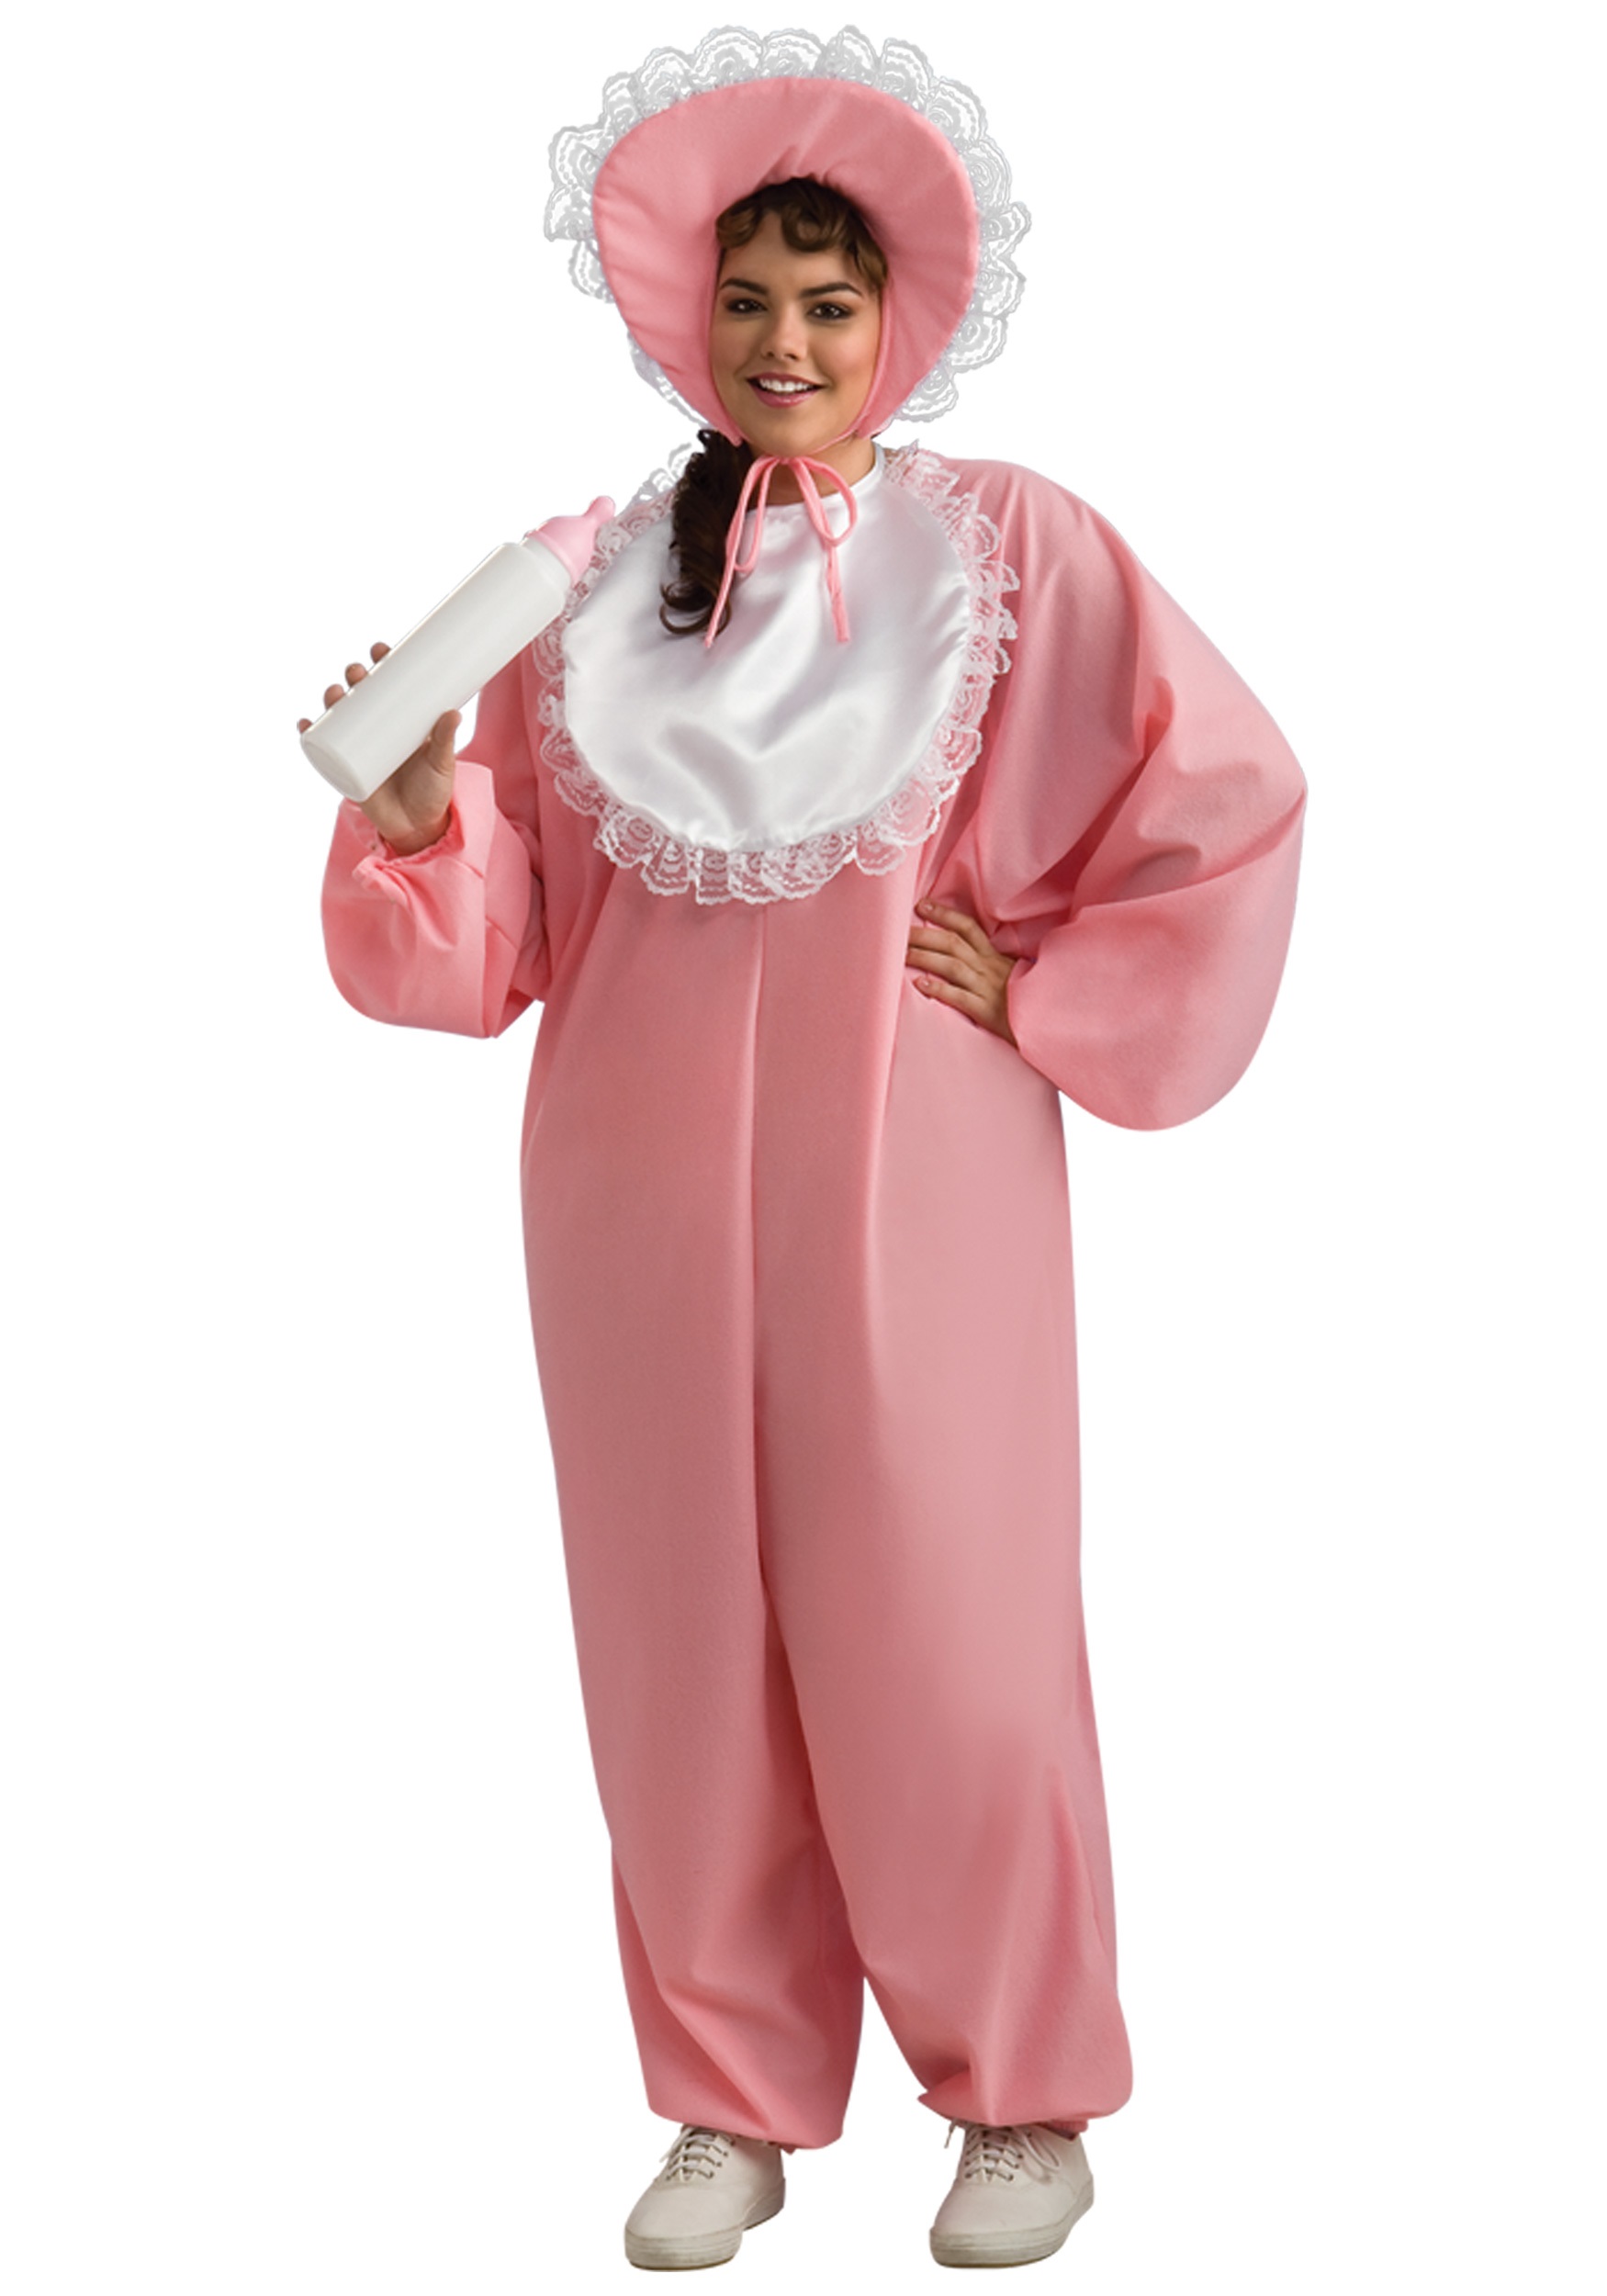 https://images.halloweencostumes.com/products/8700/1-1/adult-baby-girl-plus-size-costume.jpg